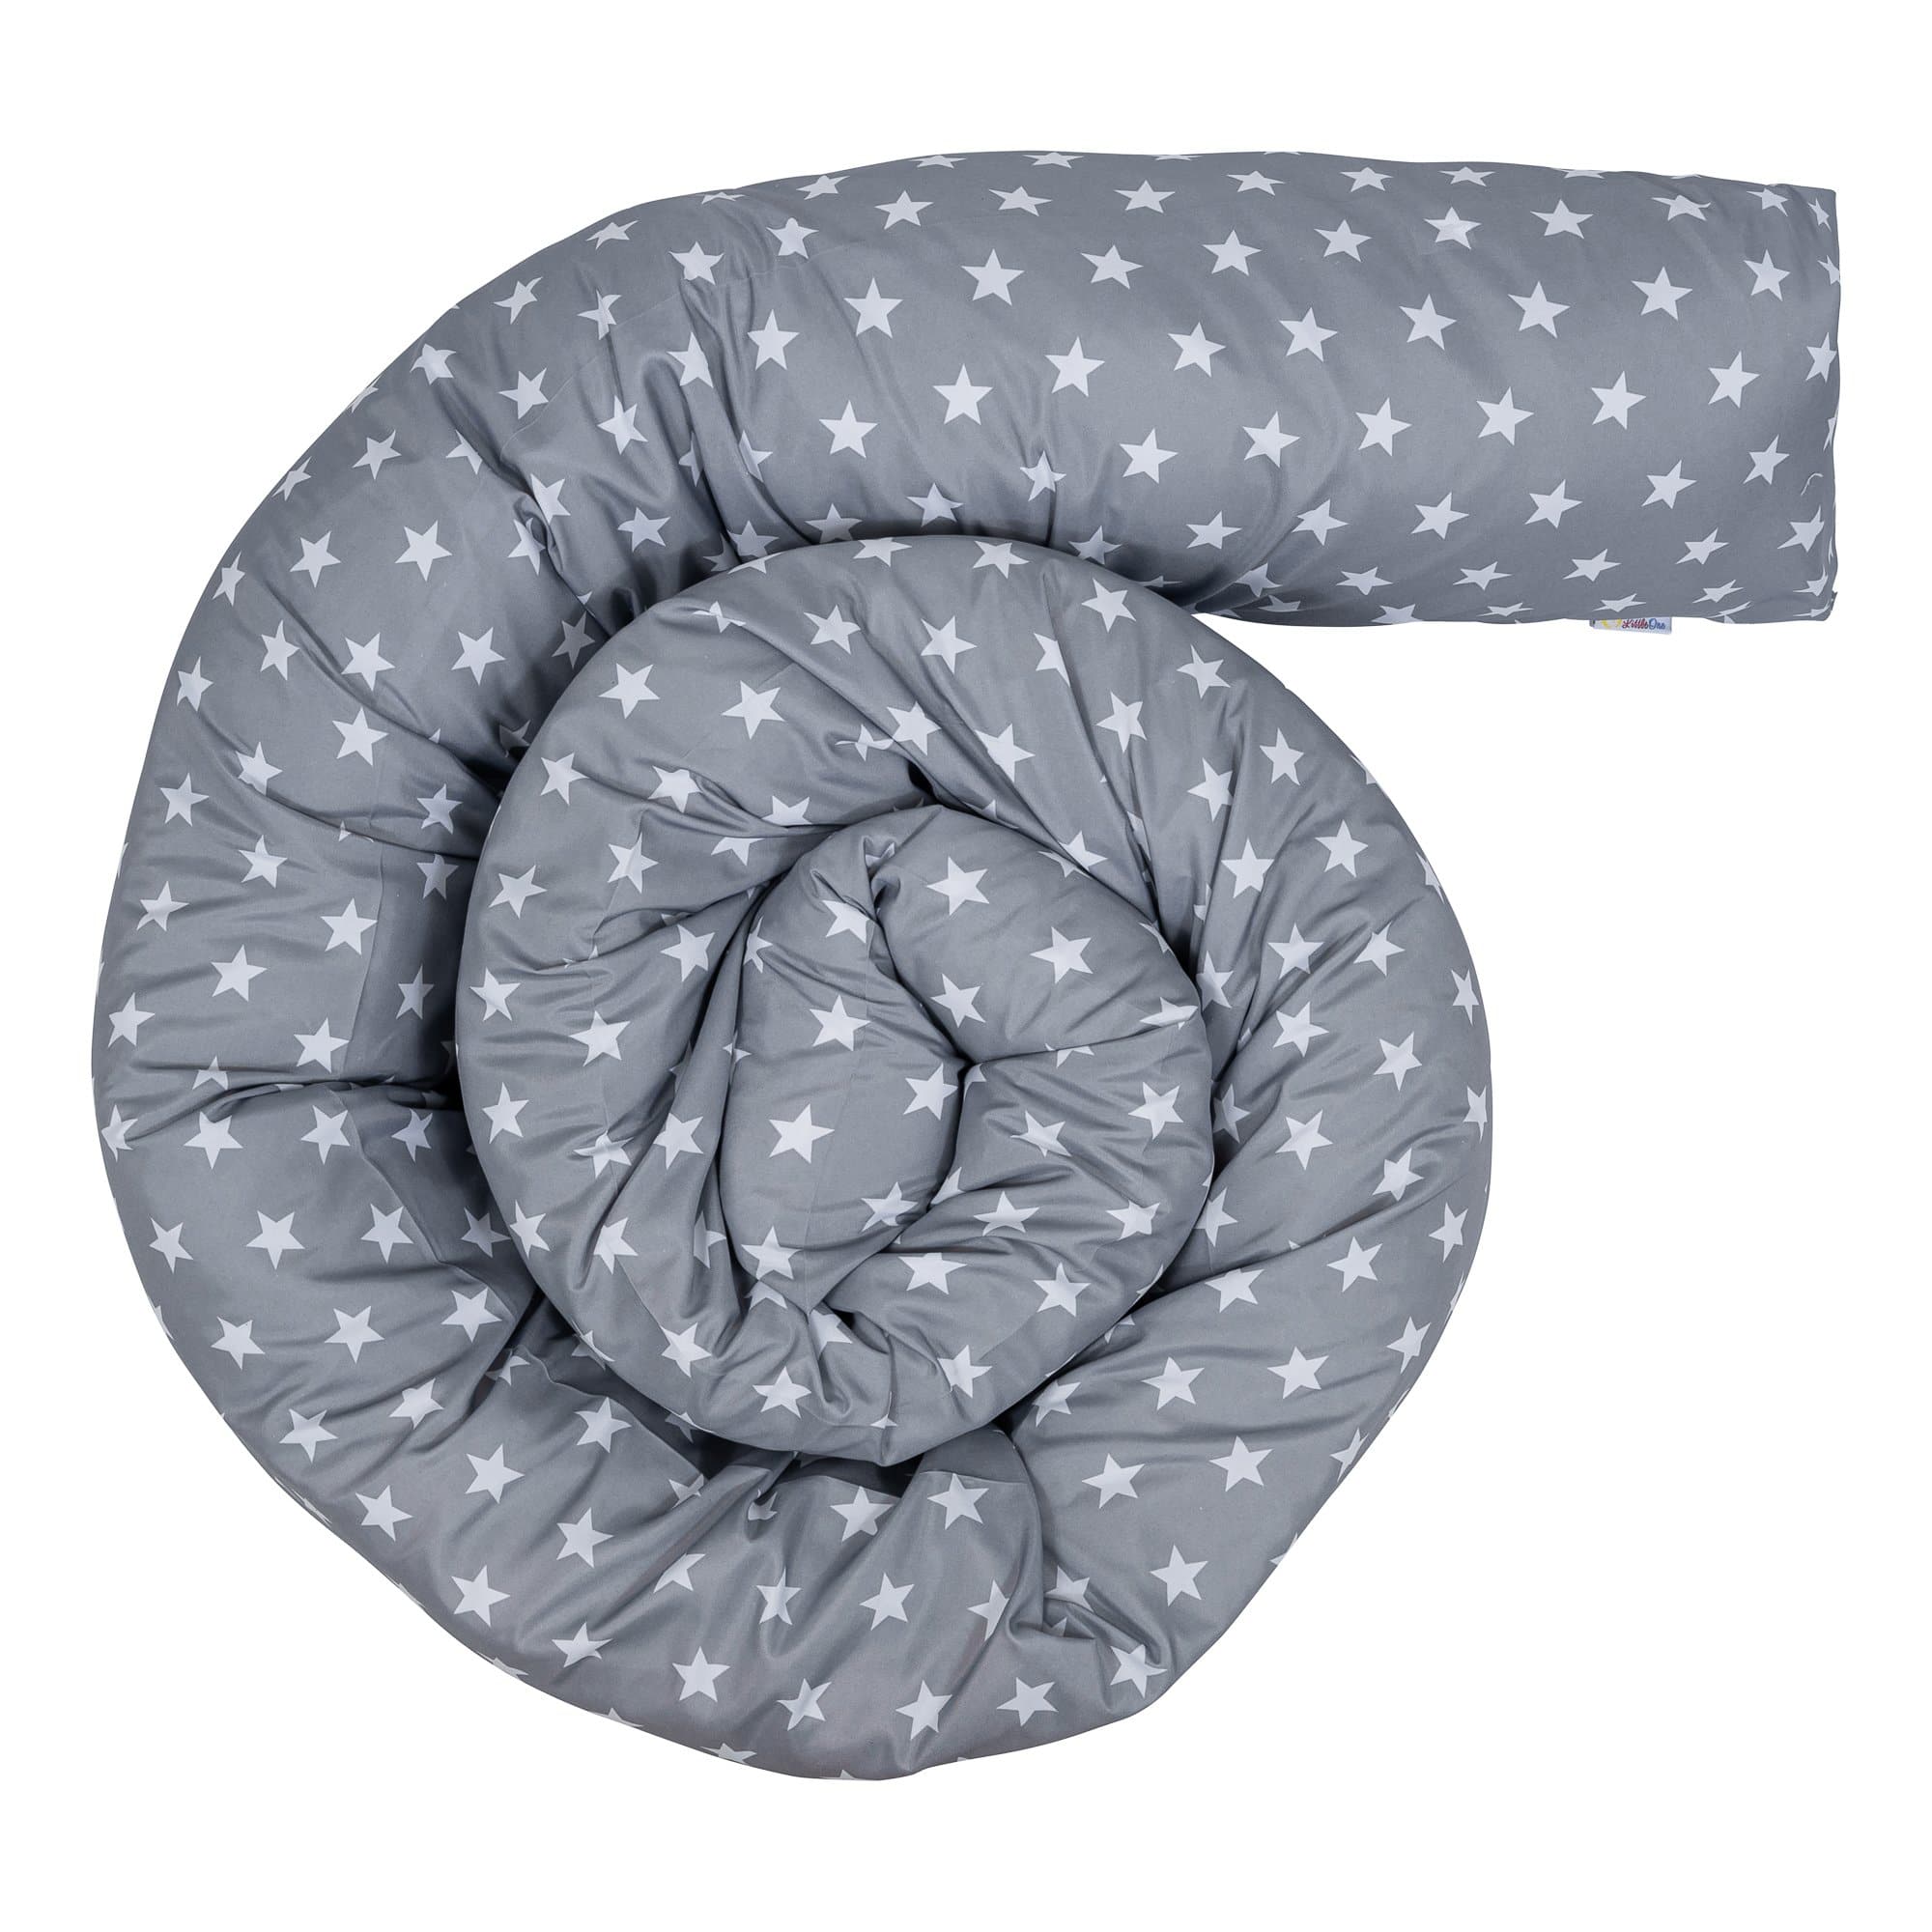 9 Ft Maternity Pillow And Case - Grey With White Stars - For Your Little One